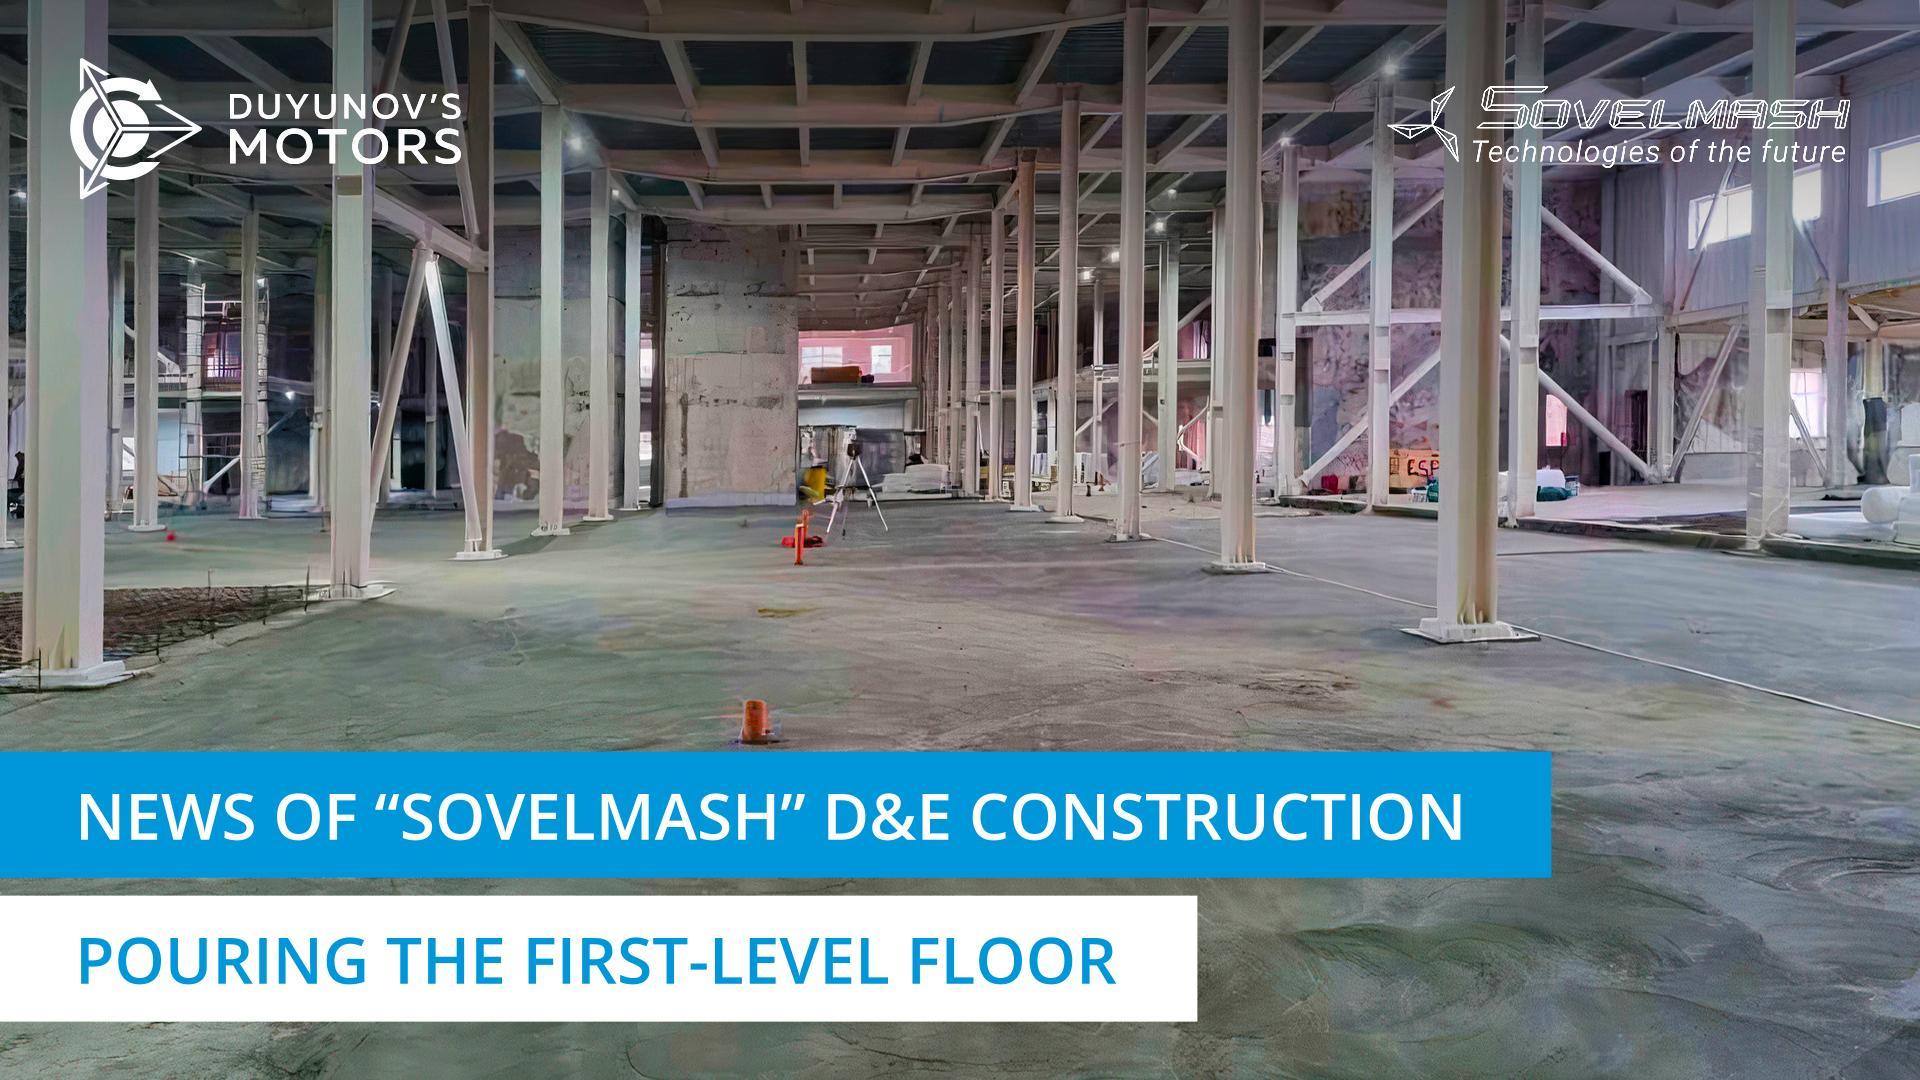 How is pouring the first-level floor in the "Sovelmash" D&E building progressing?